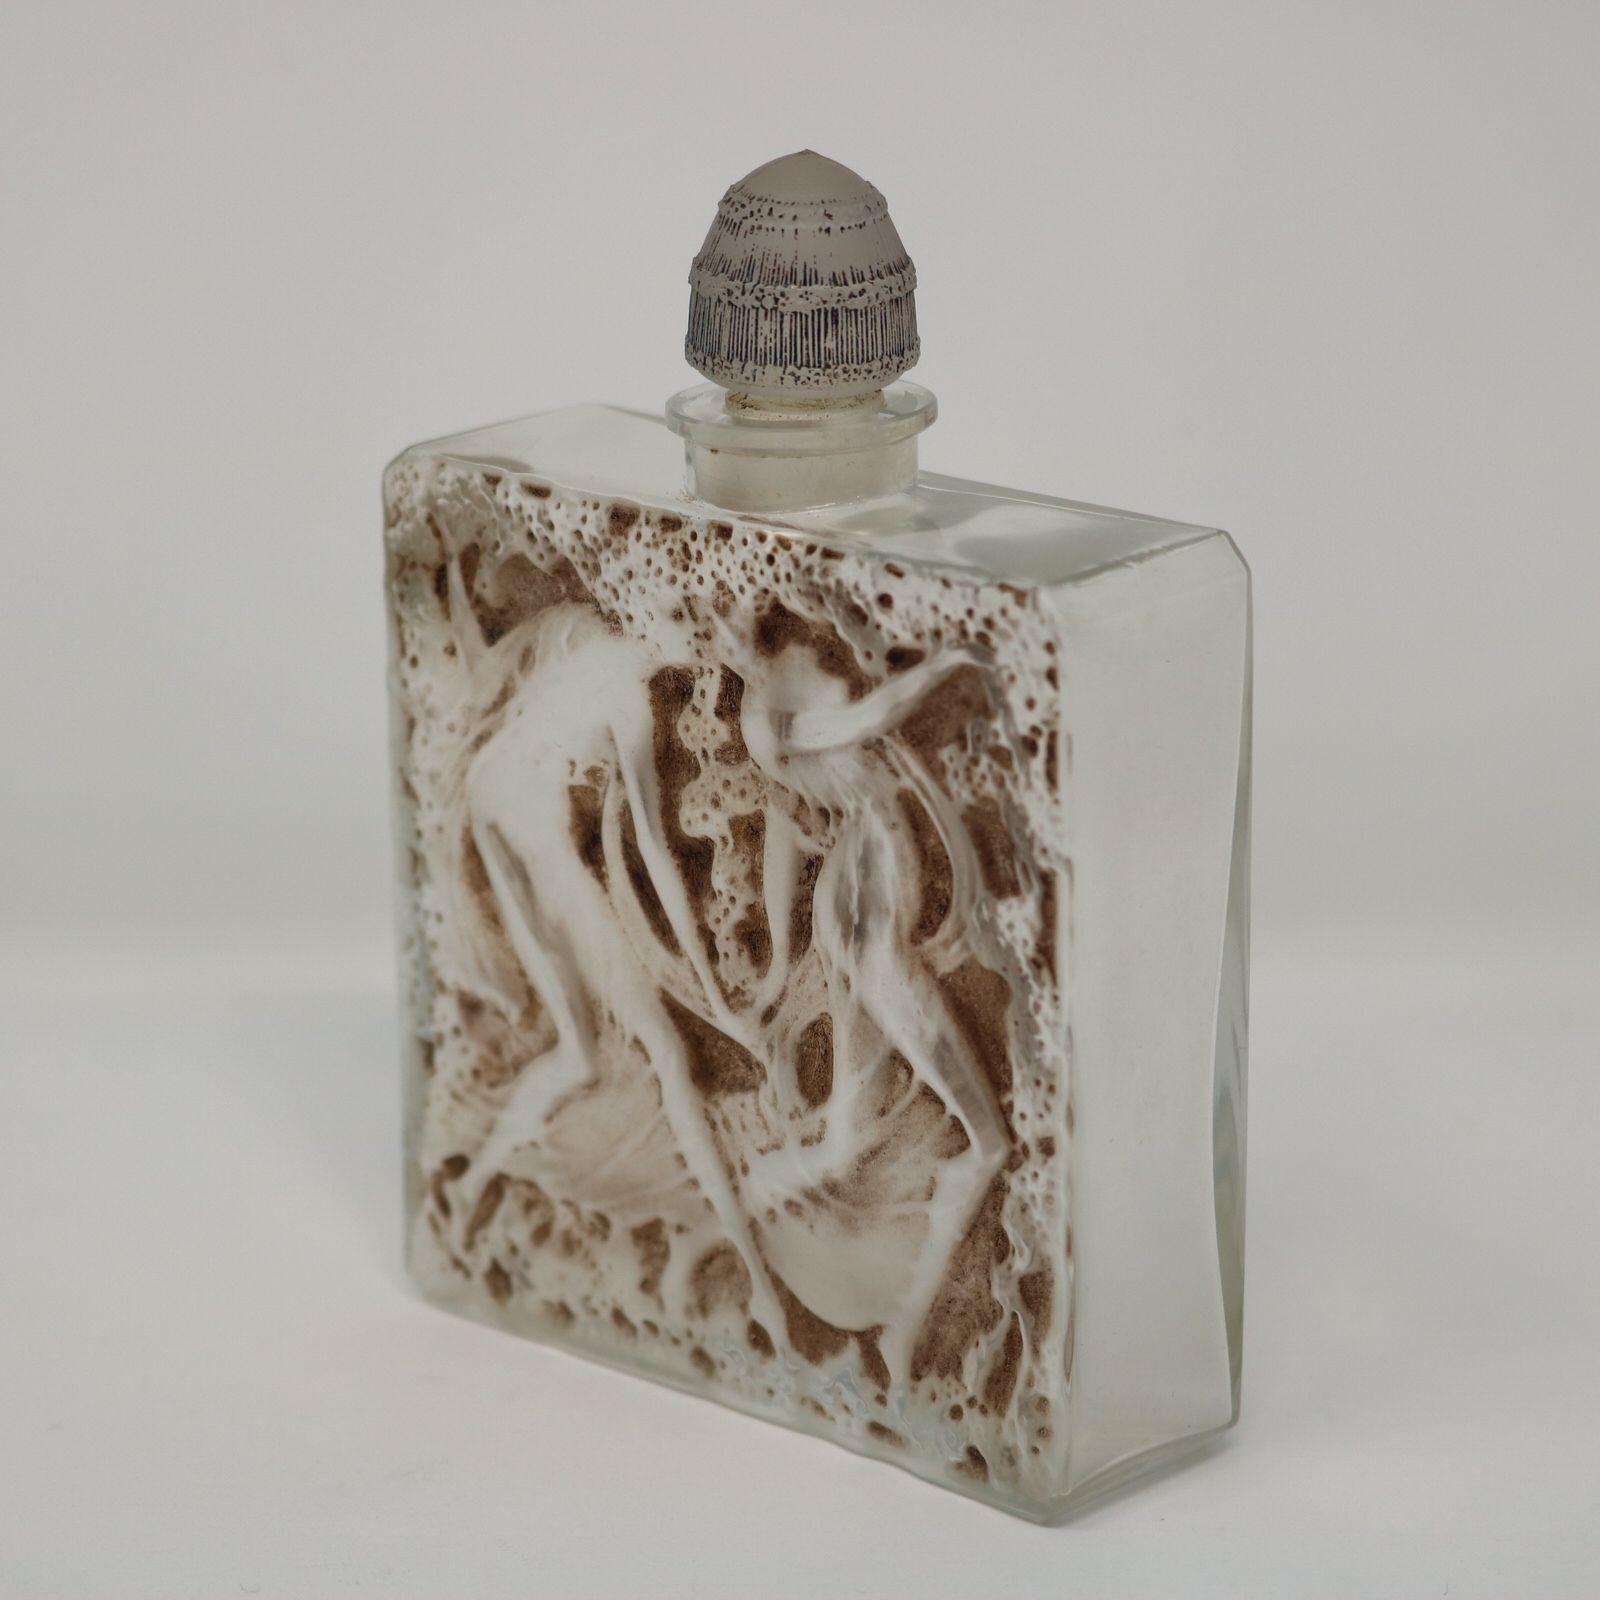 Rene lalique clear and frosted glass L'elegance perfume bottle. This pattern features two dancing female figures amongst flowers. Sepia stained relief details. An original paper label for 'L'ELEGANCE D'ORSAY' to the side. Inscribed mark to the